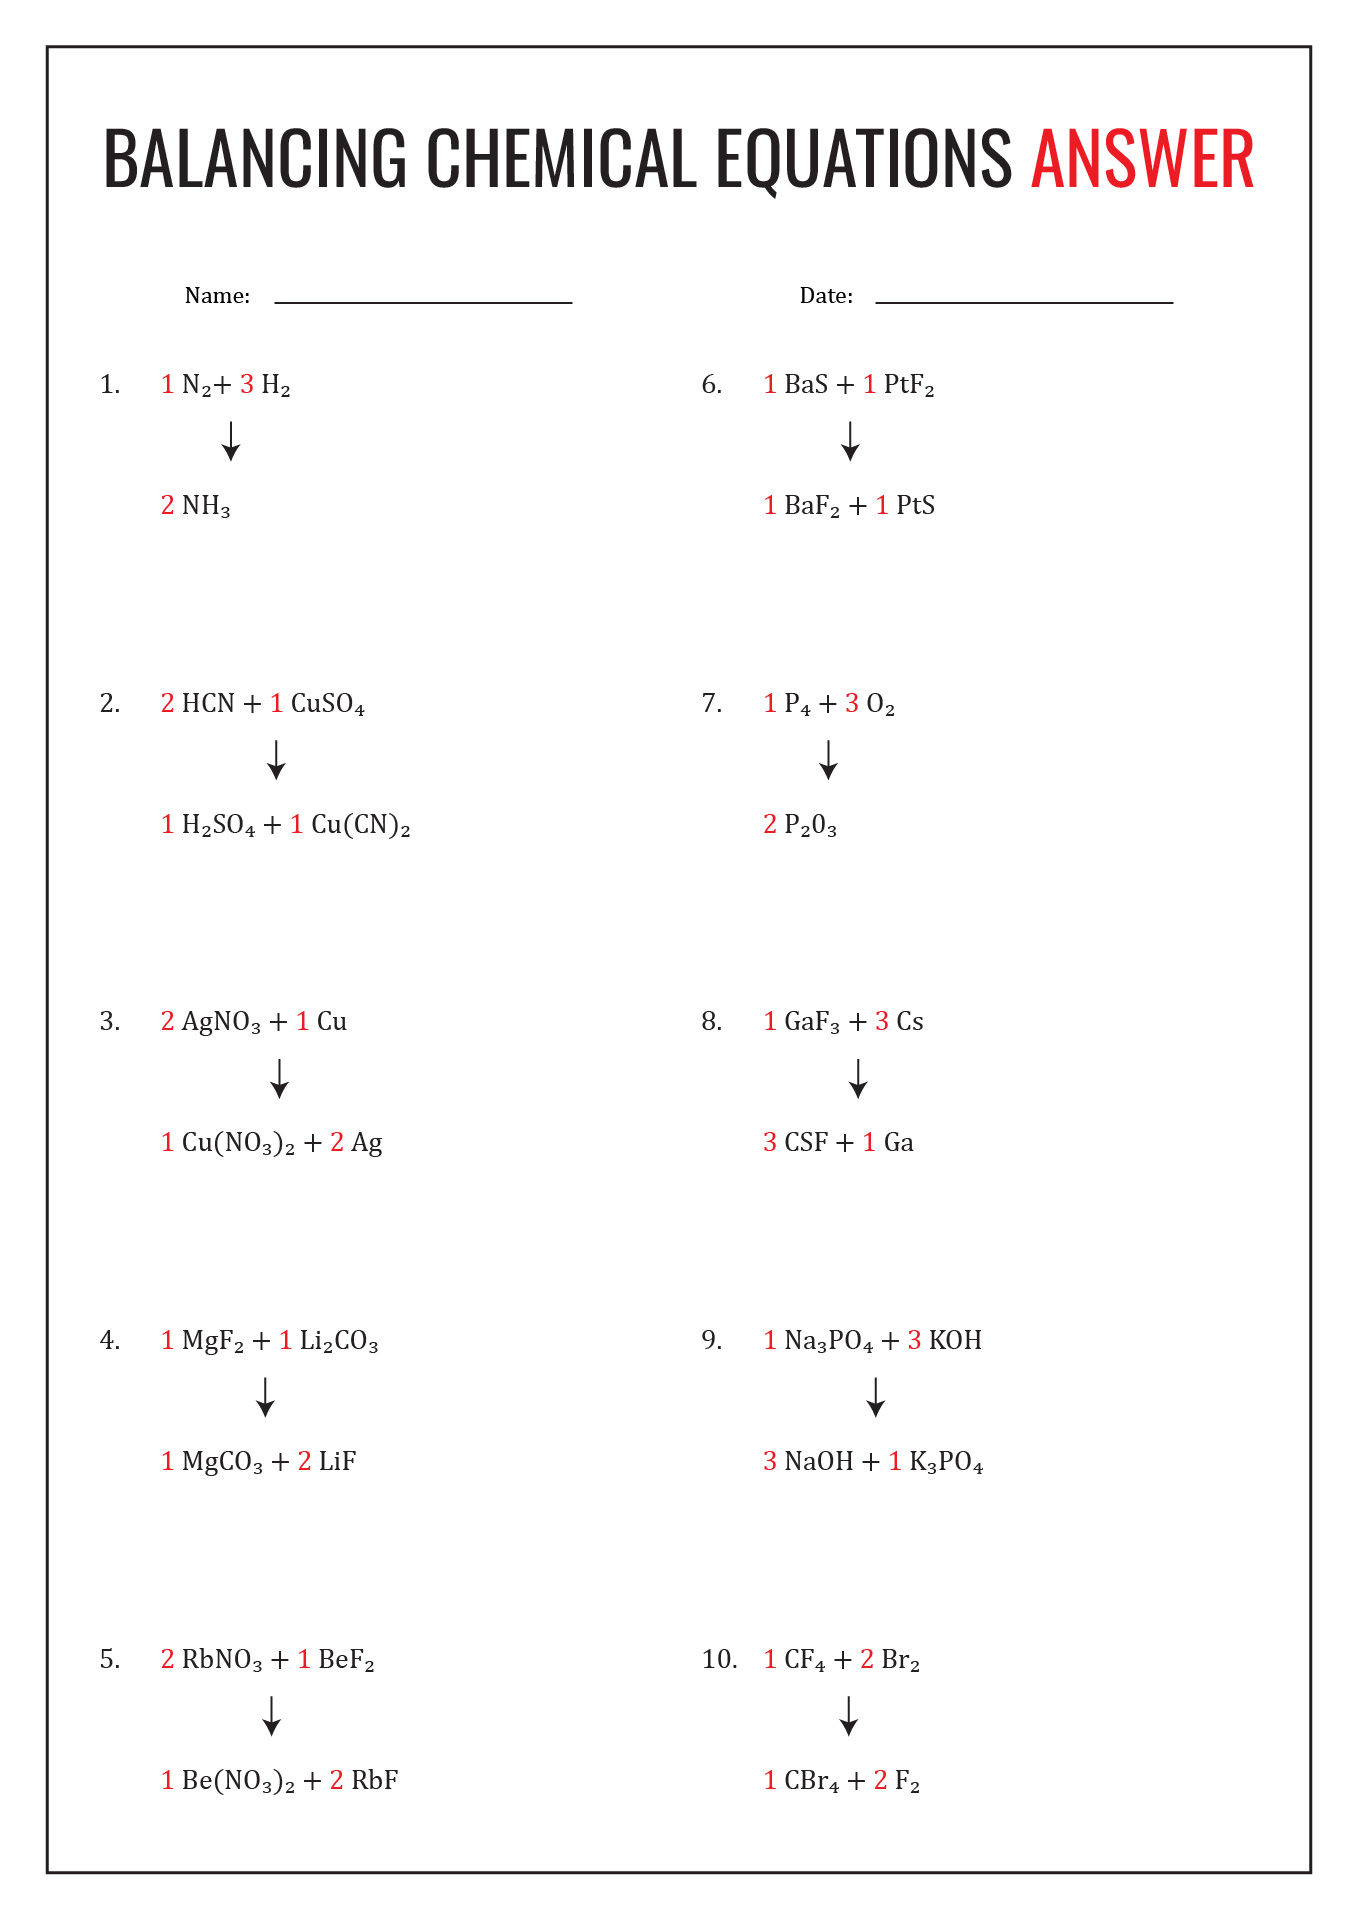 13-best-images-of-chemical-equations-worksheet-balancing-chemical